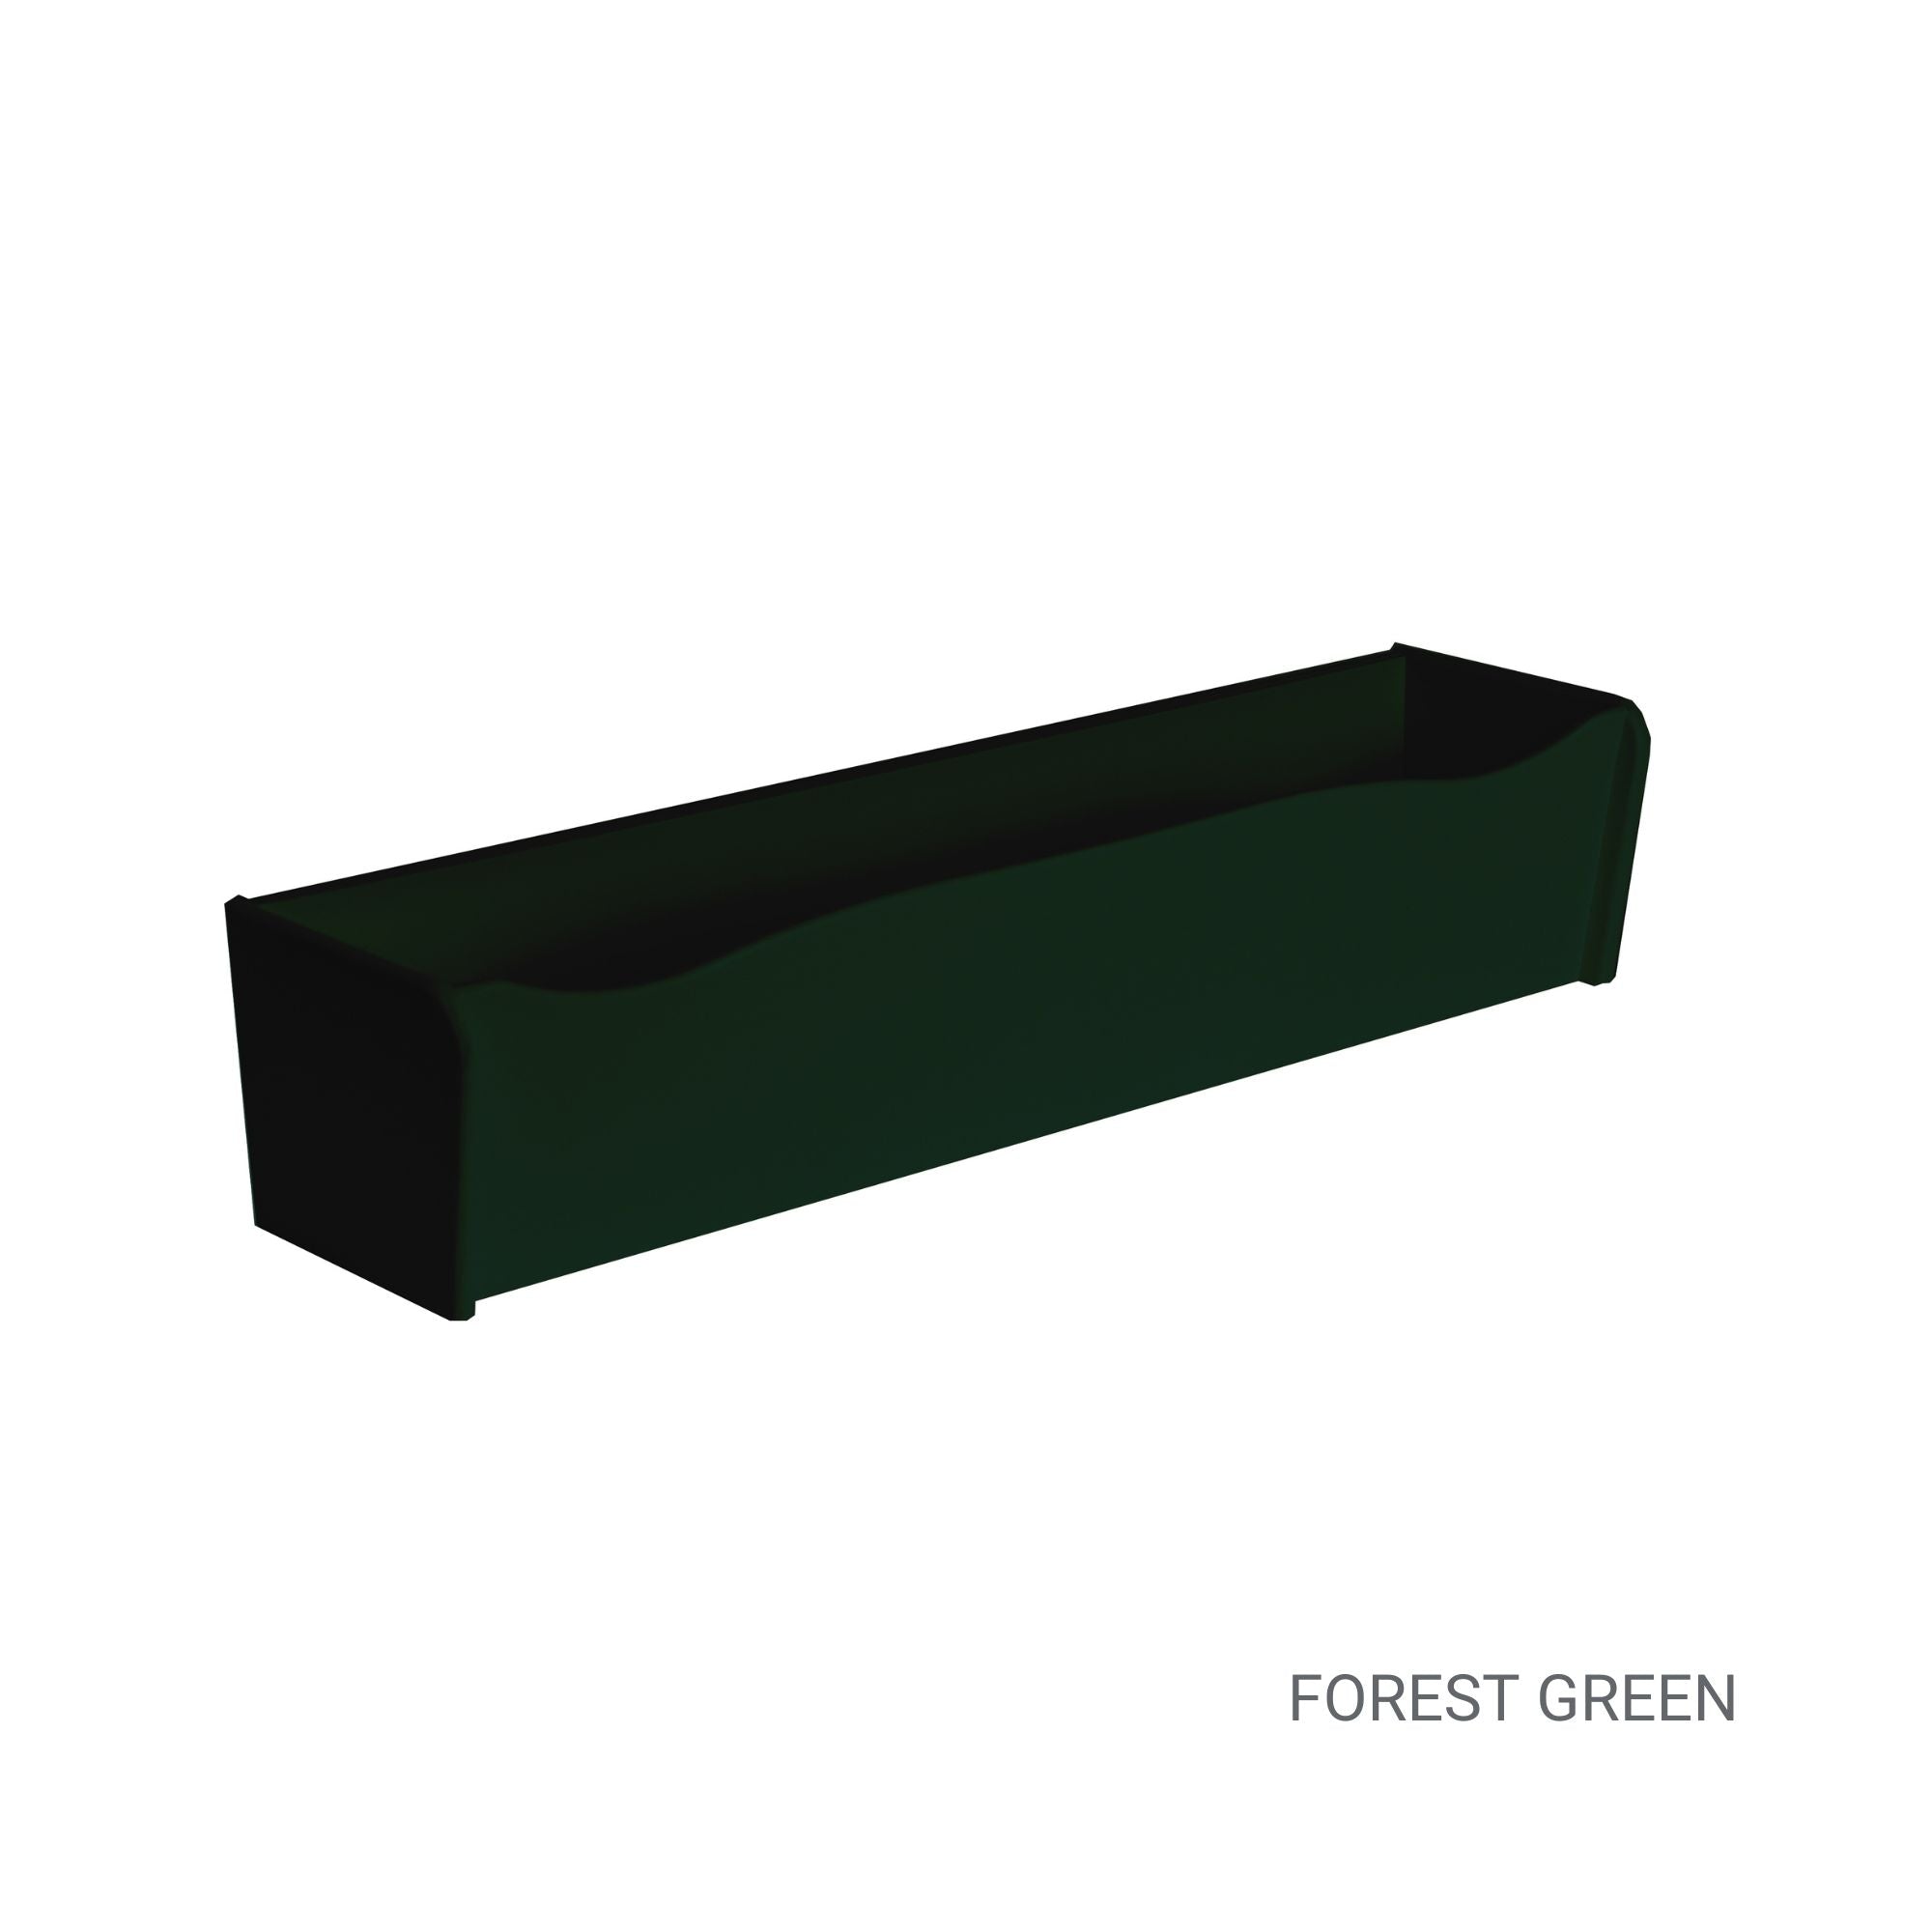 24" x 6" x 5" Forest Green Flower Box for Window Sills, Sheds, Playhouses, and MORE